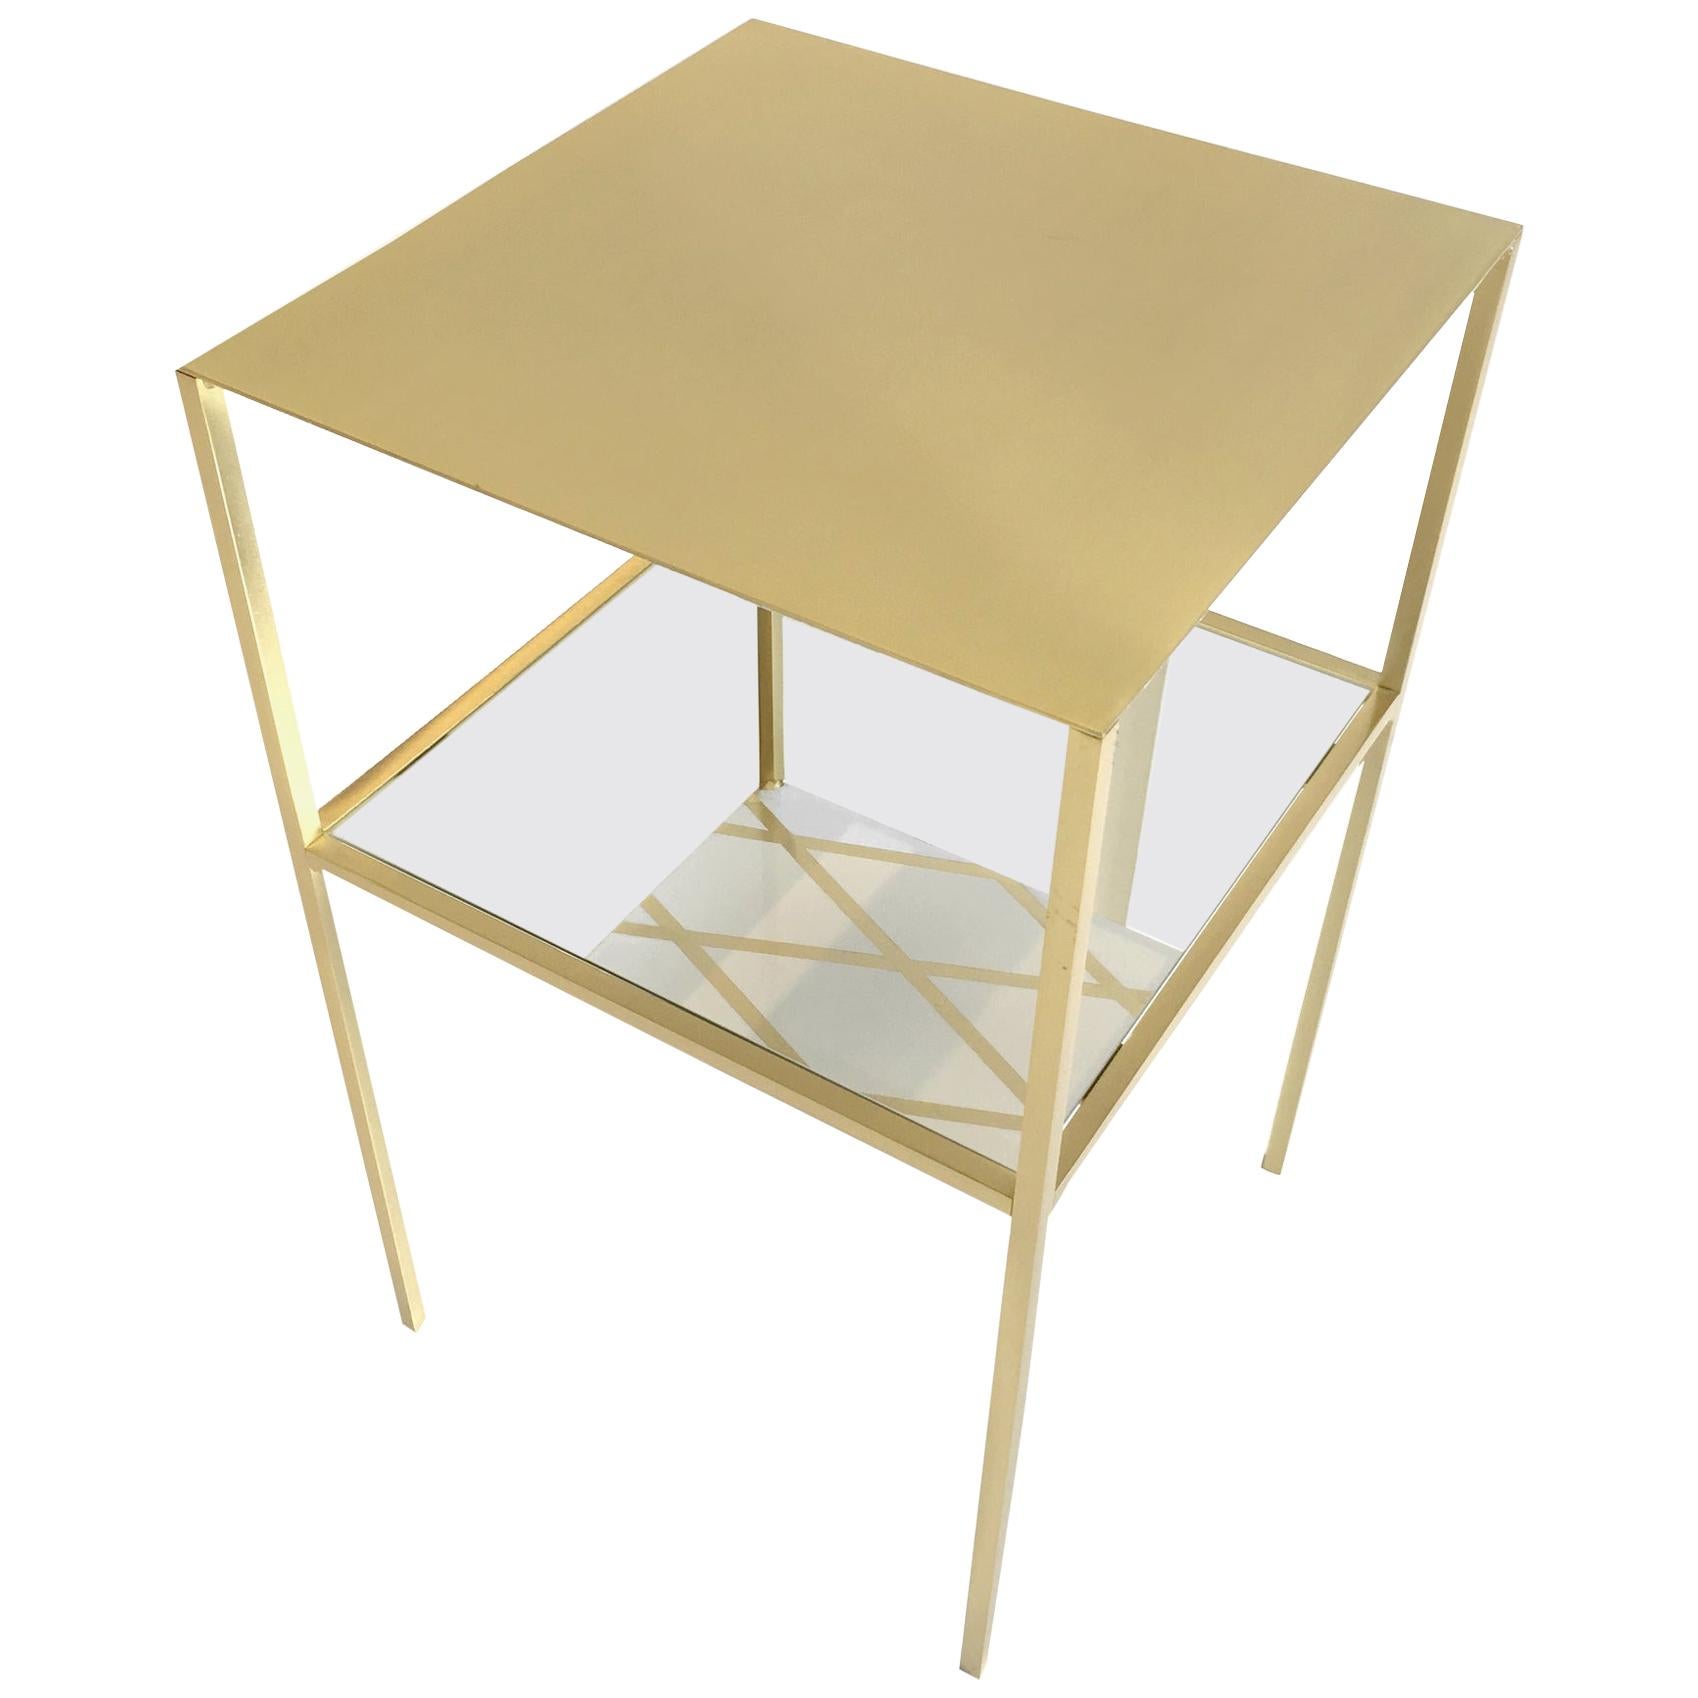 In Stock in Los Angeles, Tabu Square Gold and Brass Coffee Table, Made in Italy For Sale